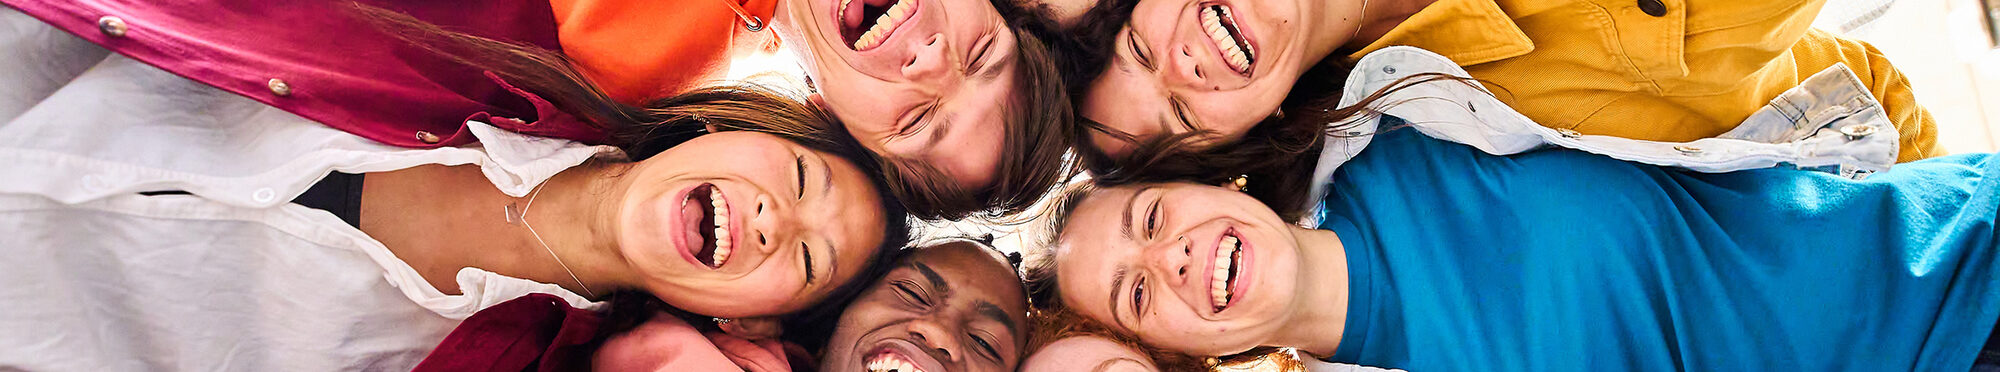 Large multiracial group of smiling young people standing hugging looking at camera. Low angle view.